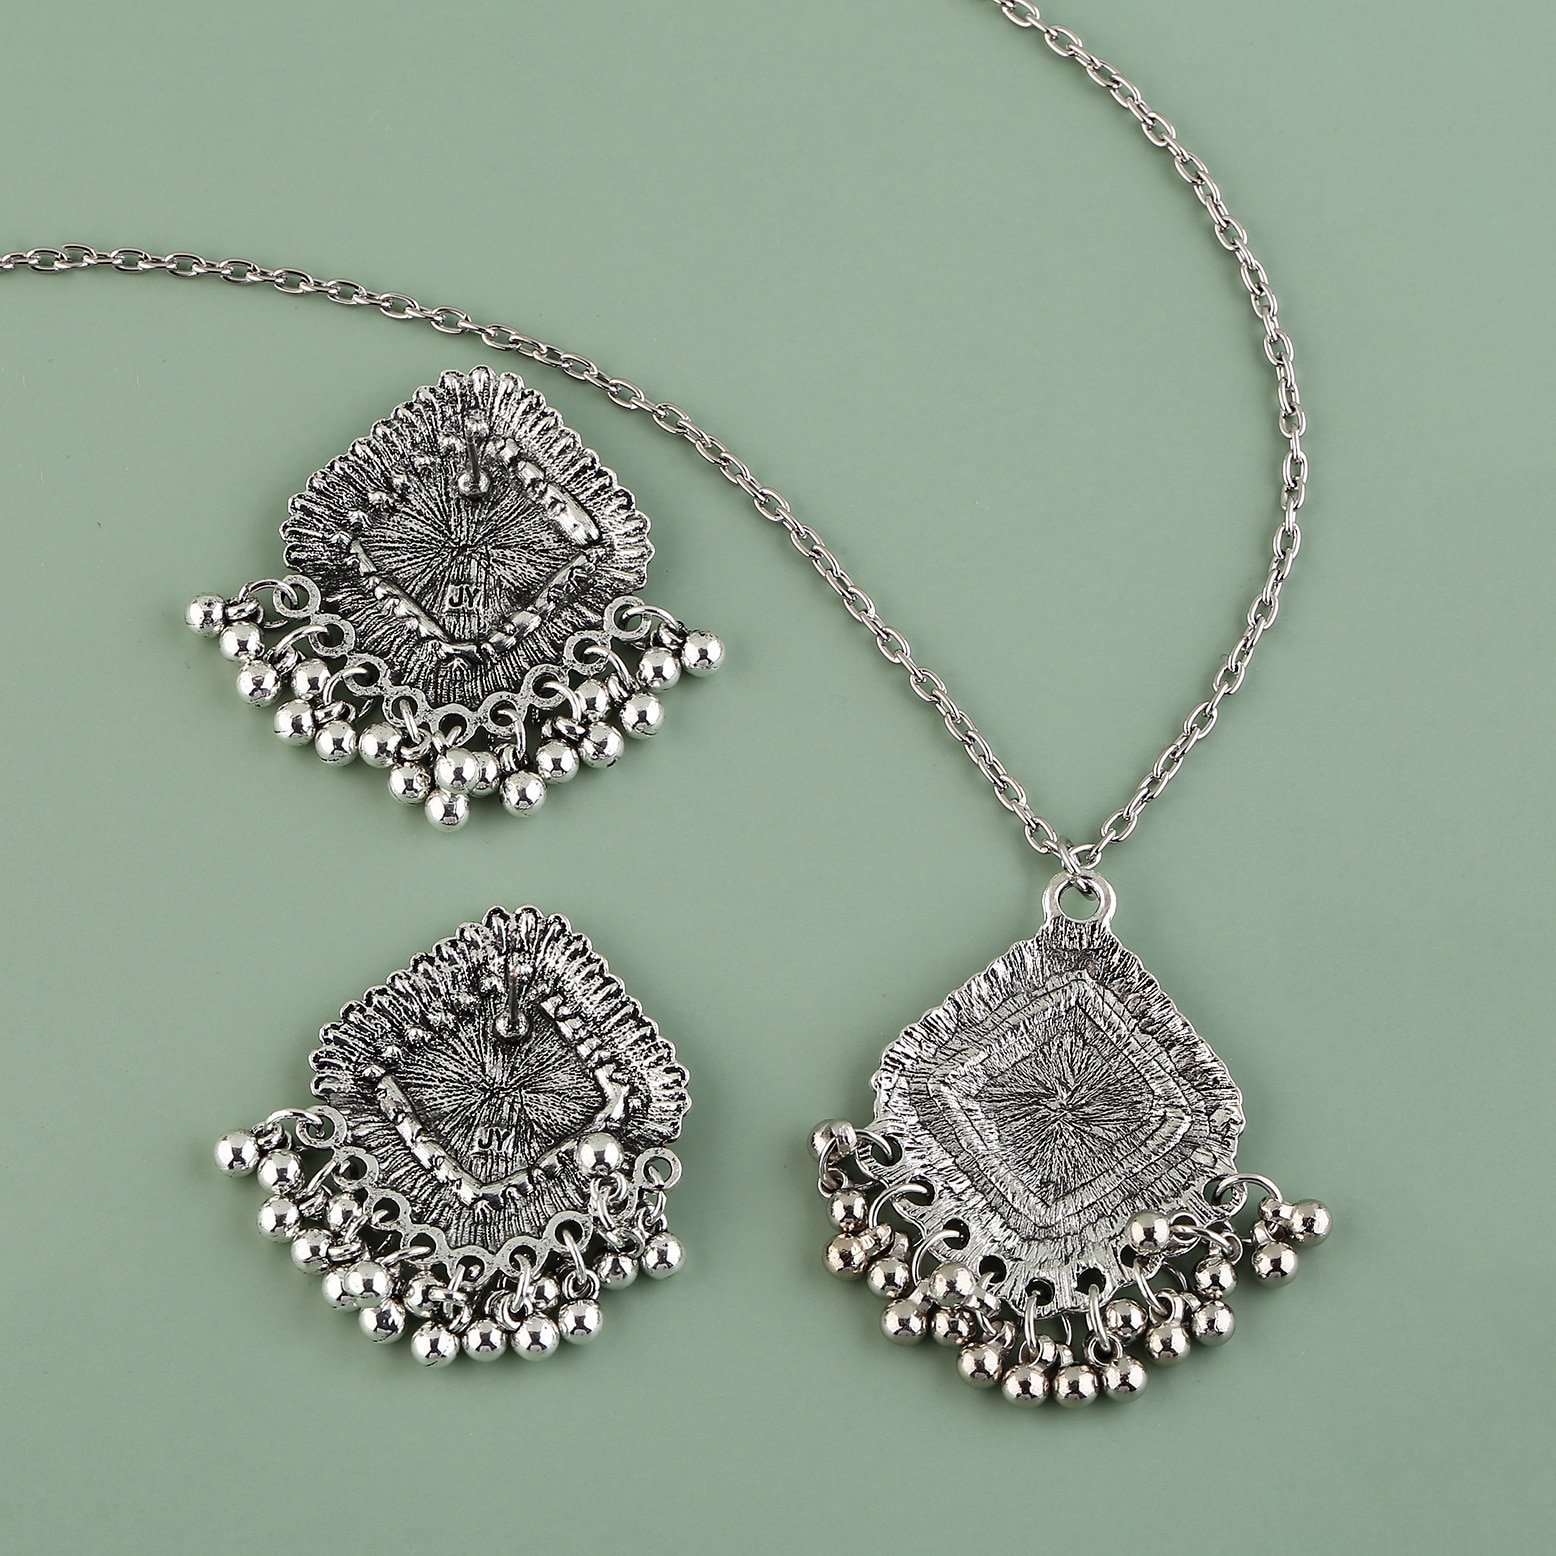 Vintage-Silver-Color-Flower-Jewelry-Sets-For-Women-Bell-Tassel-Necklaces-Earring-Bridal-Afghan-India-1005004536452730-5